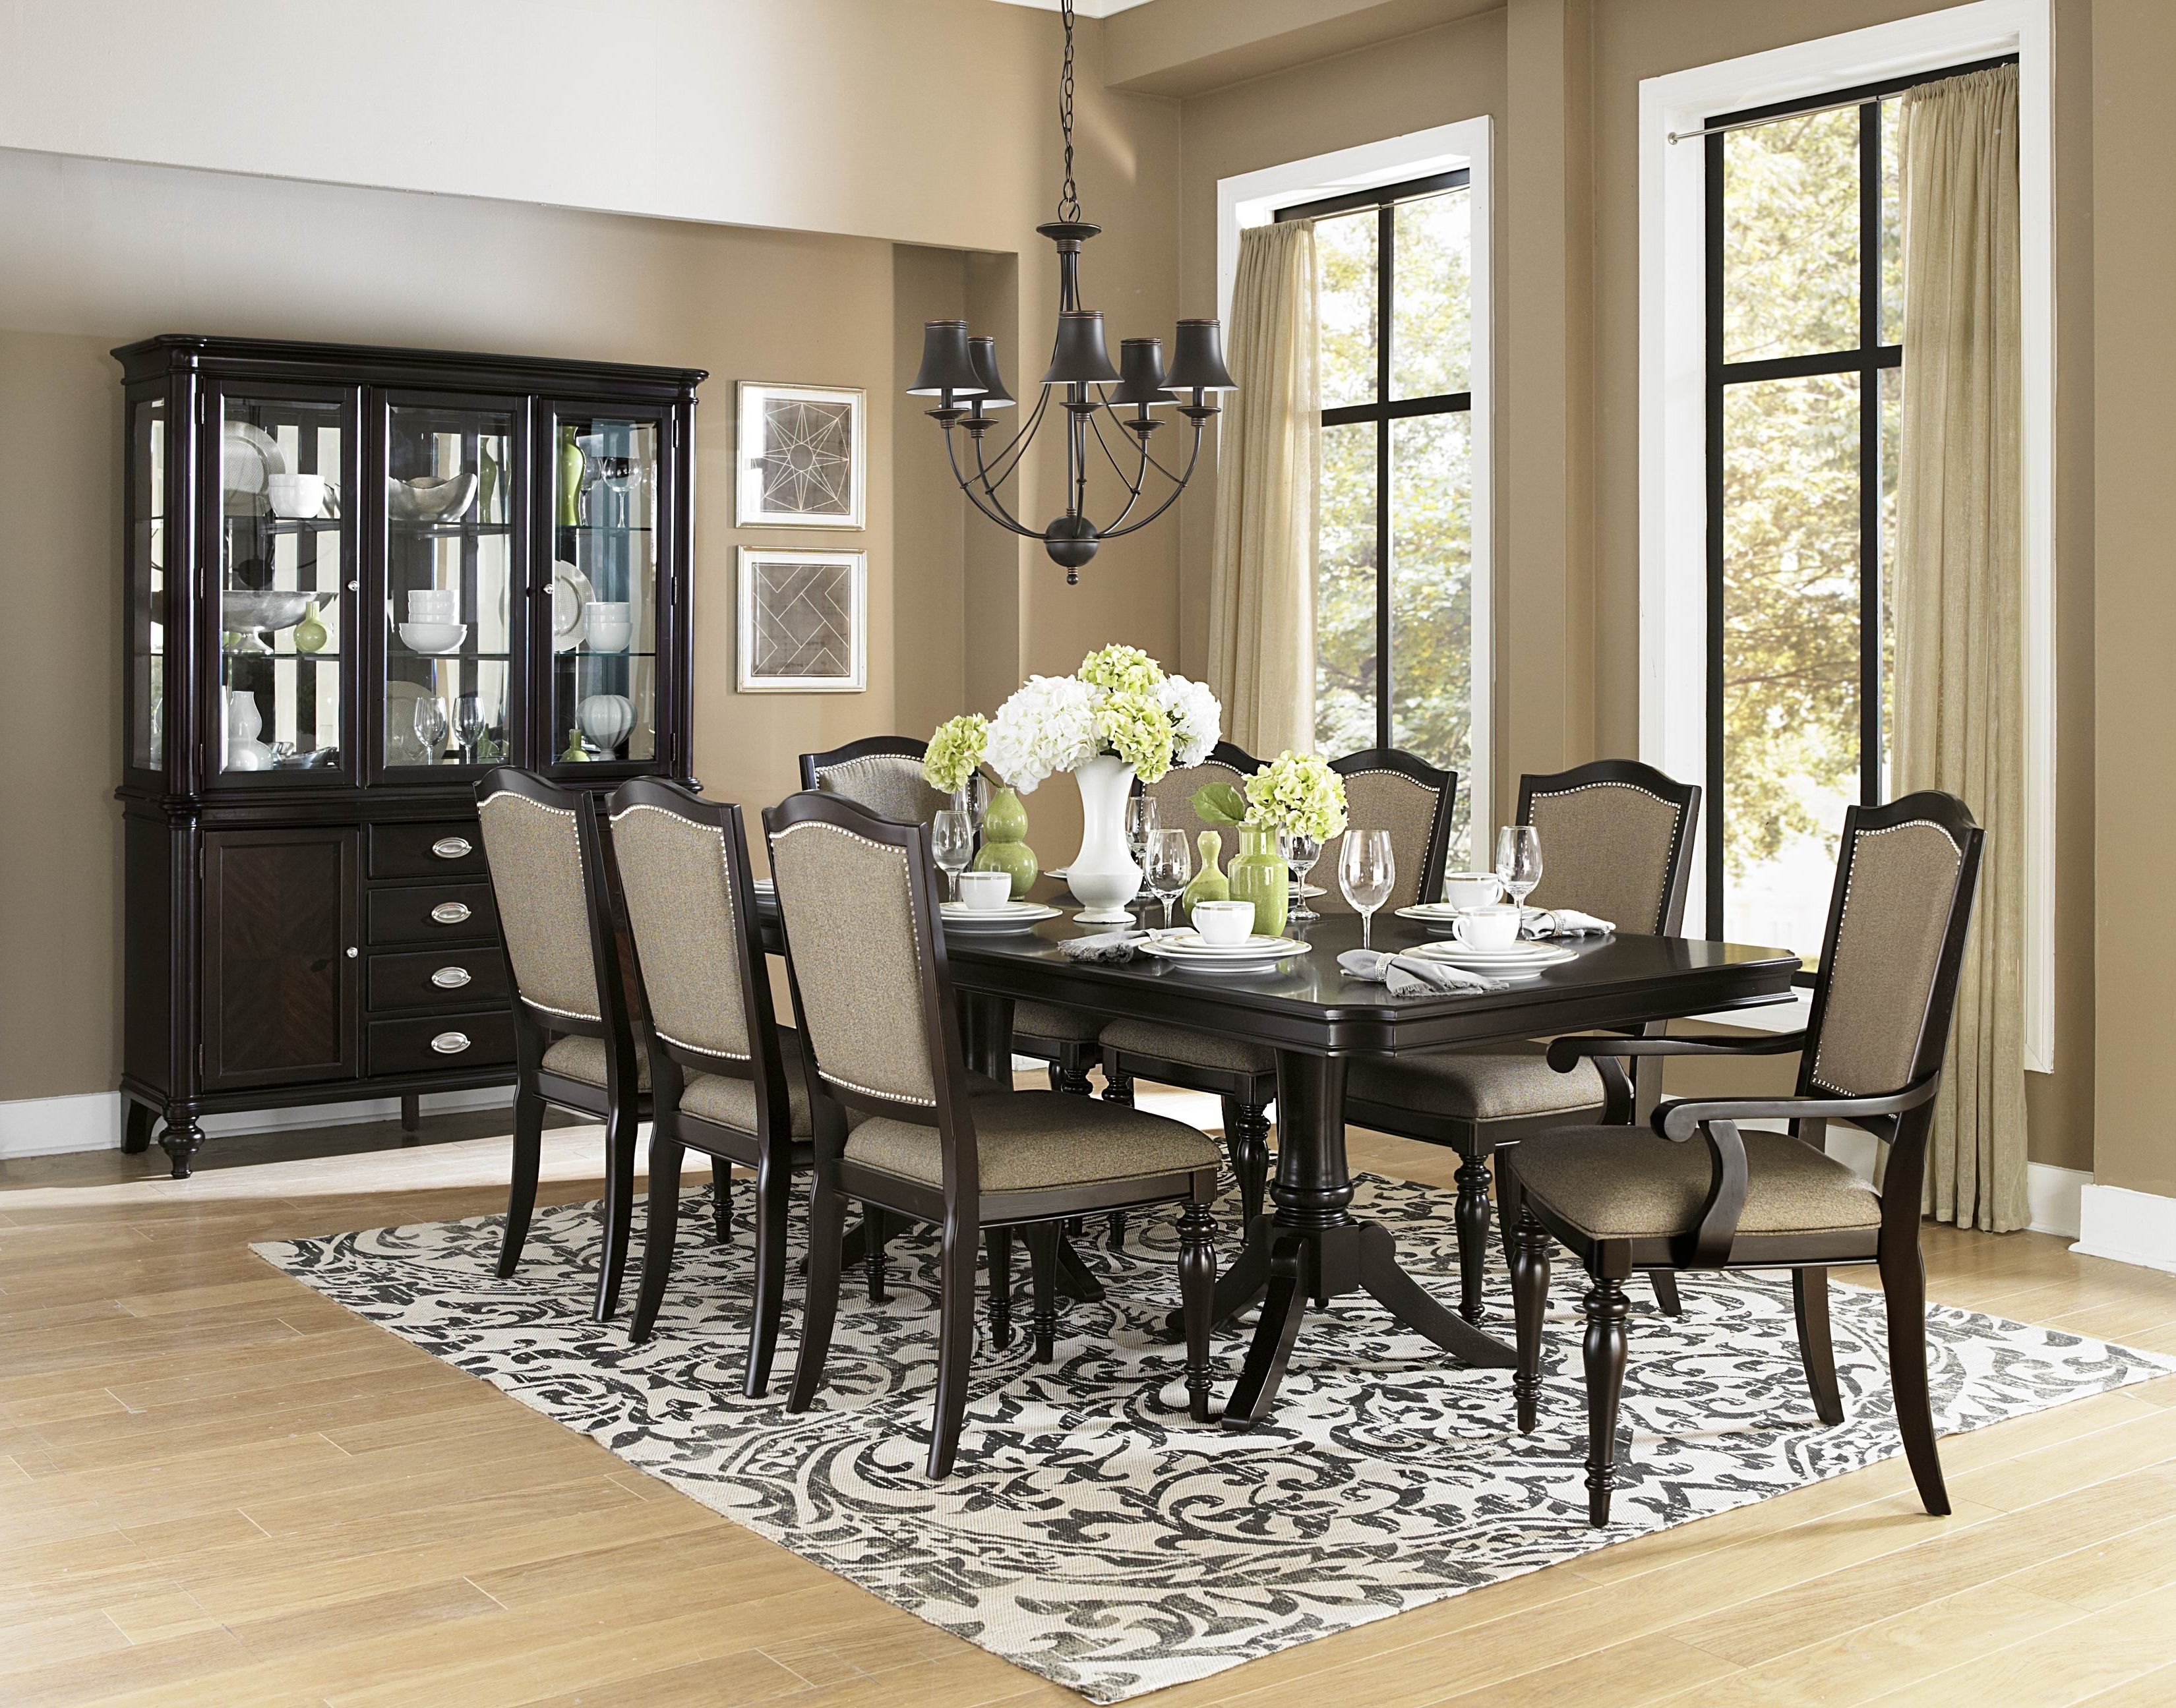 Best And Newest Dining Room Dining Room End Chairs Mission Dining Table Small Round Intended For Pedestal Dining Tables And Chairs (View 16 of 25)